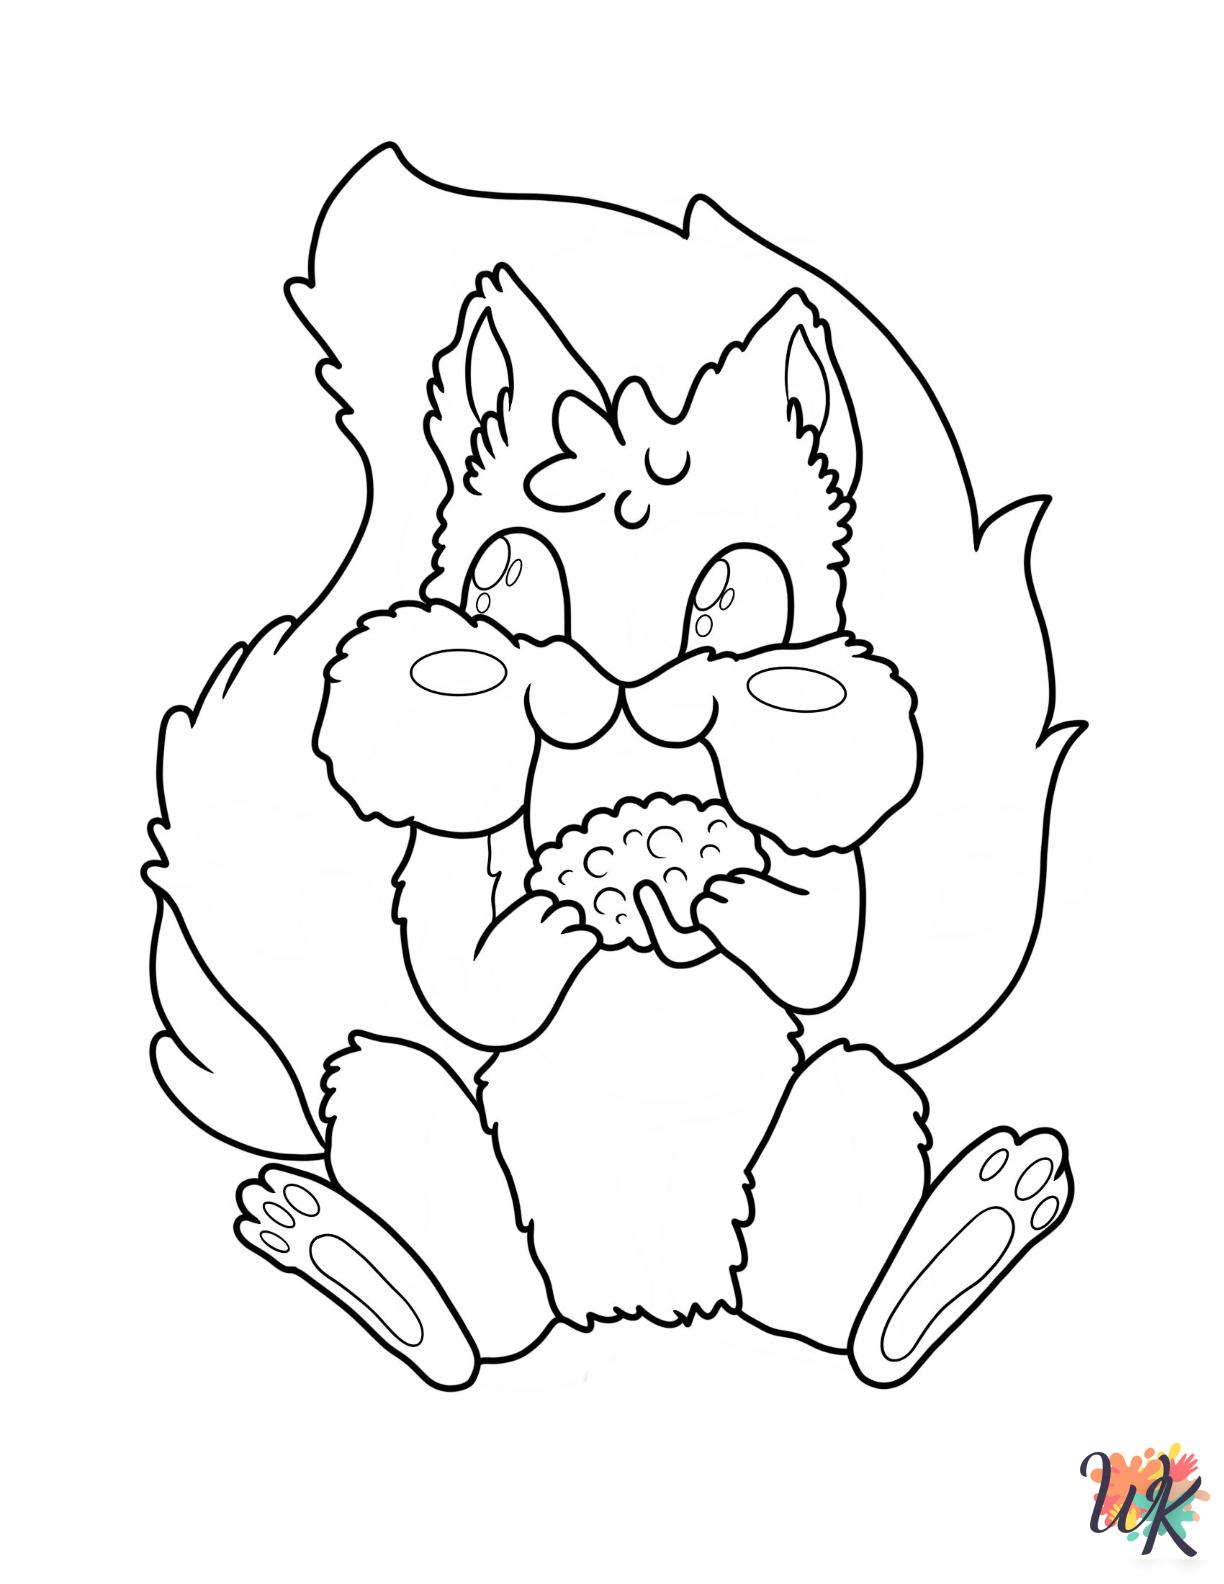 detailed Squirrel coloring pages for adults